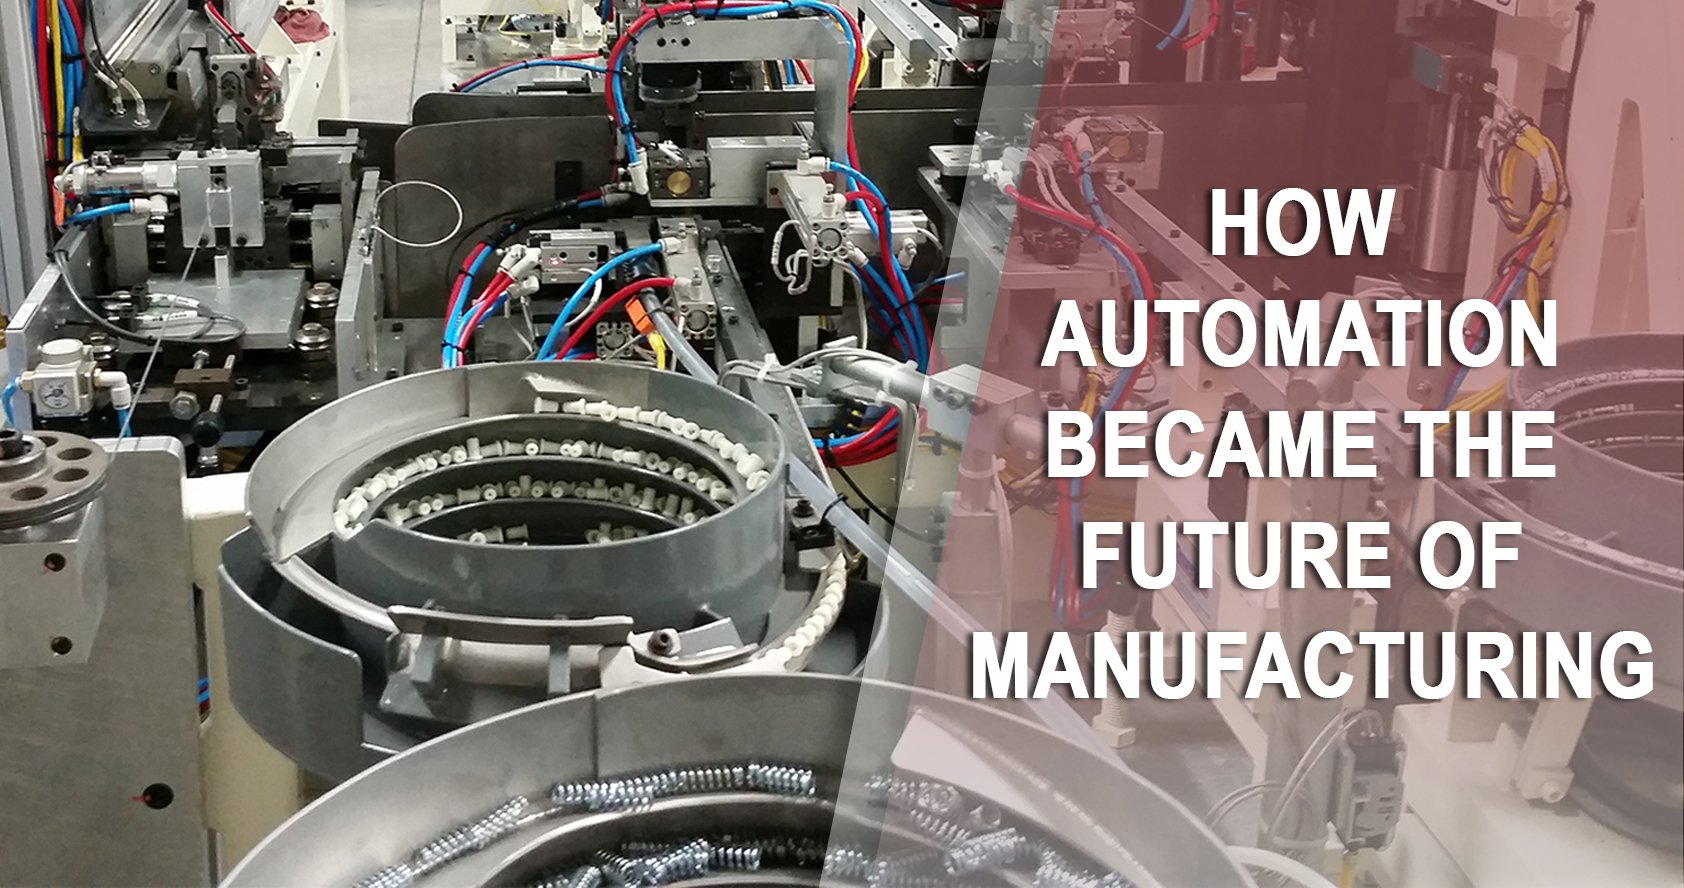 How Automation Became the Future of Manufacturing banner image